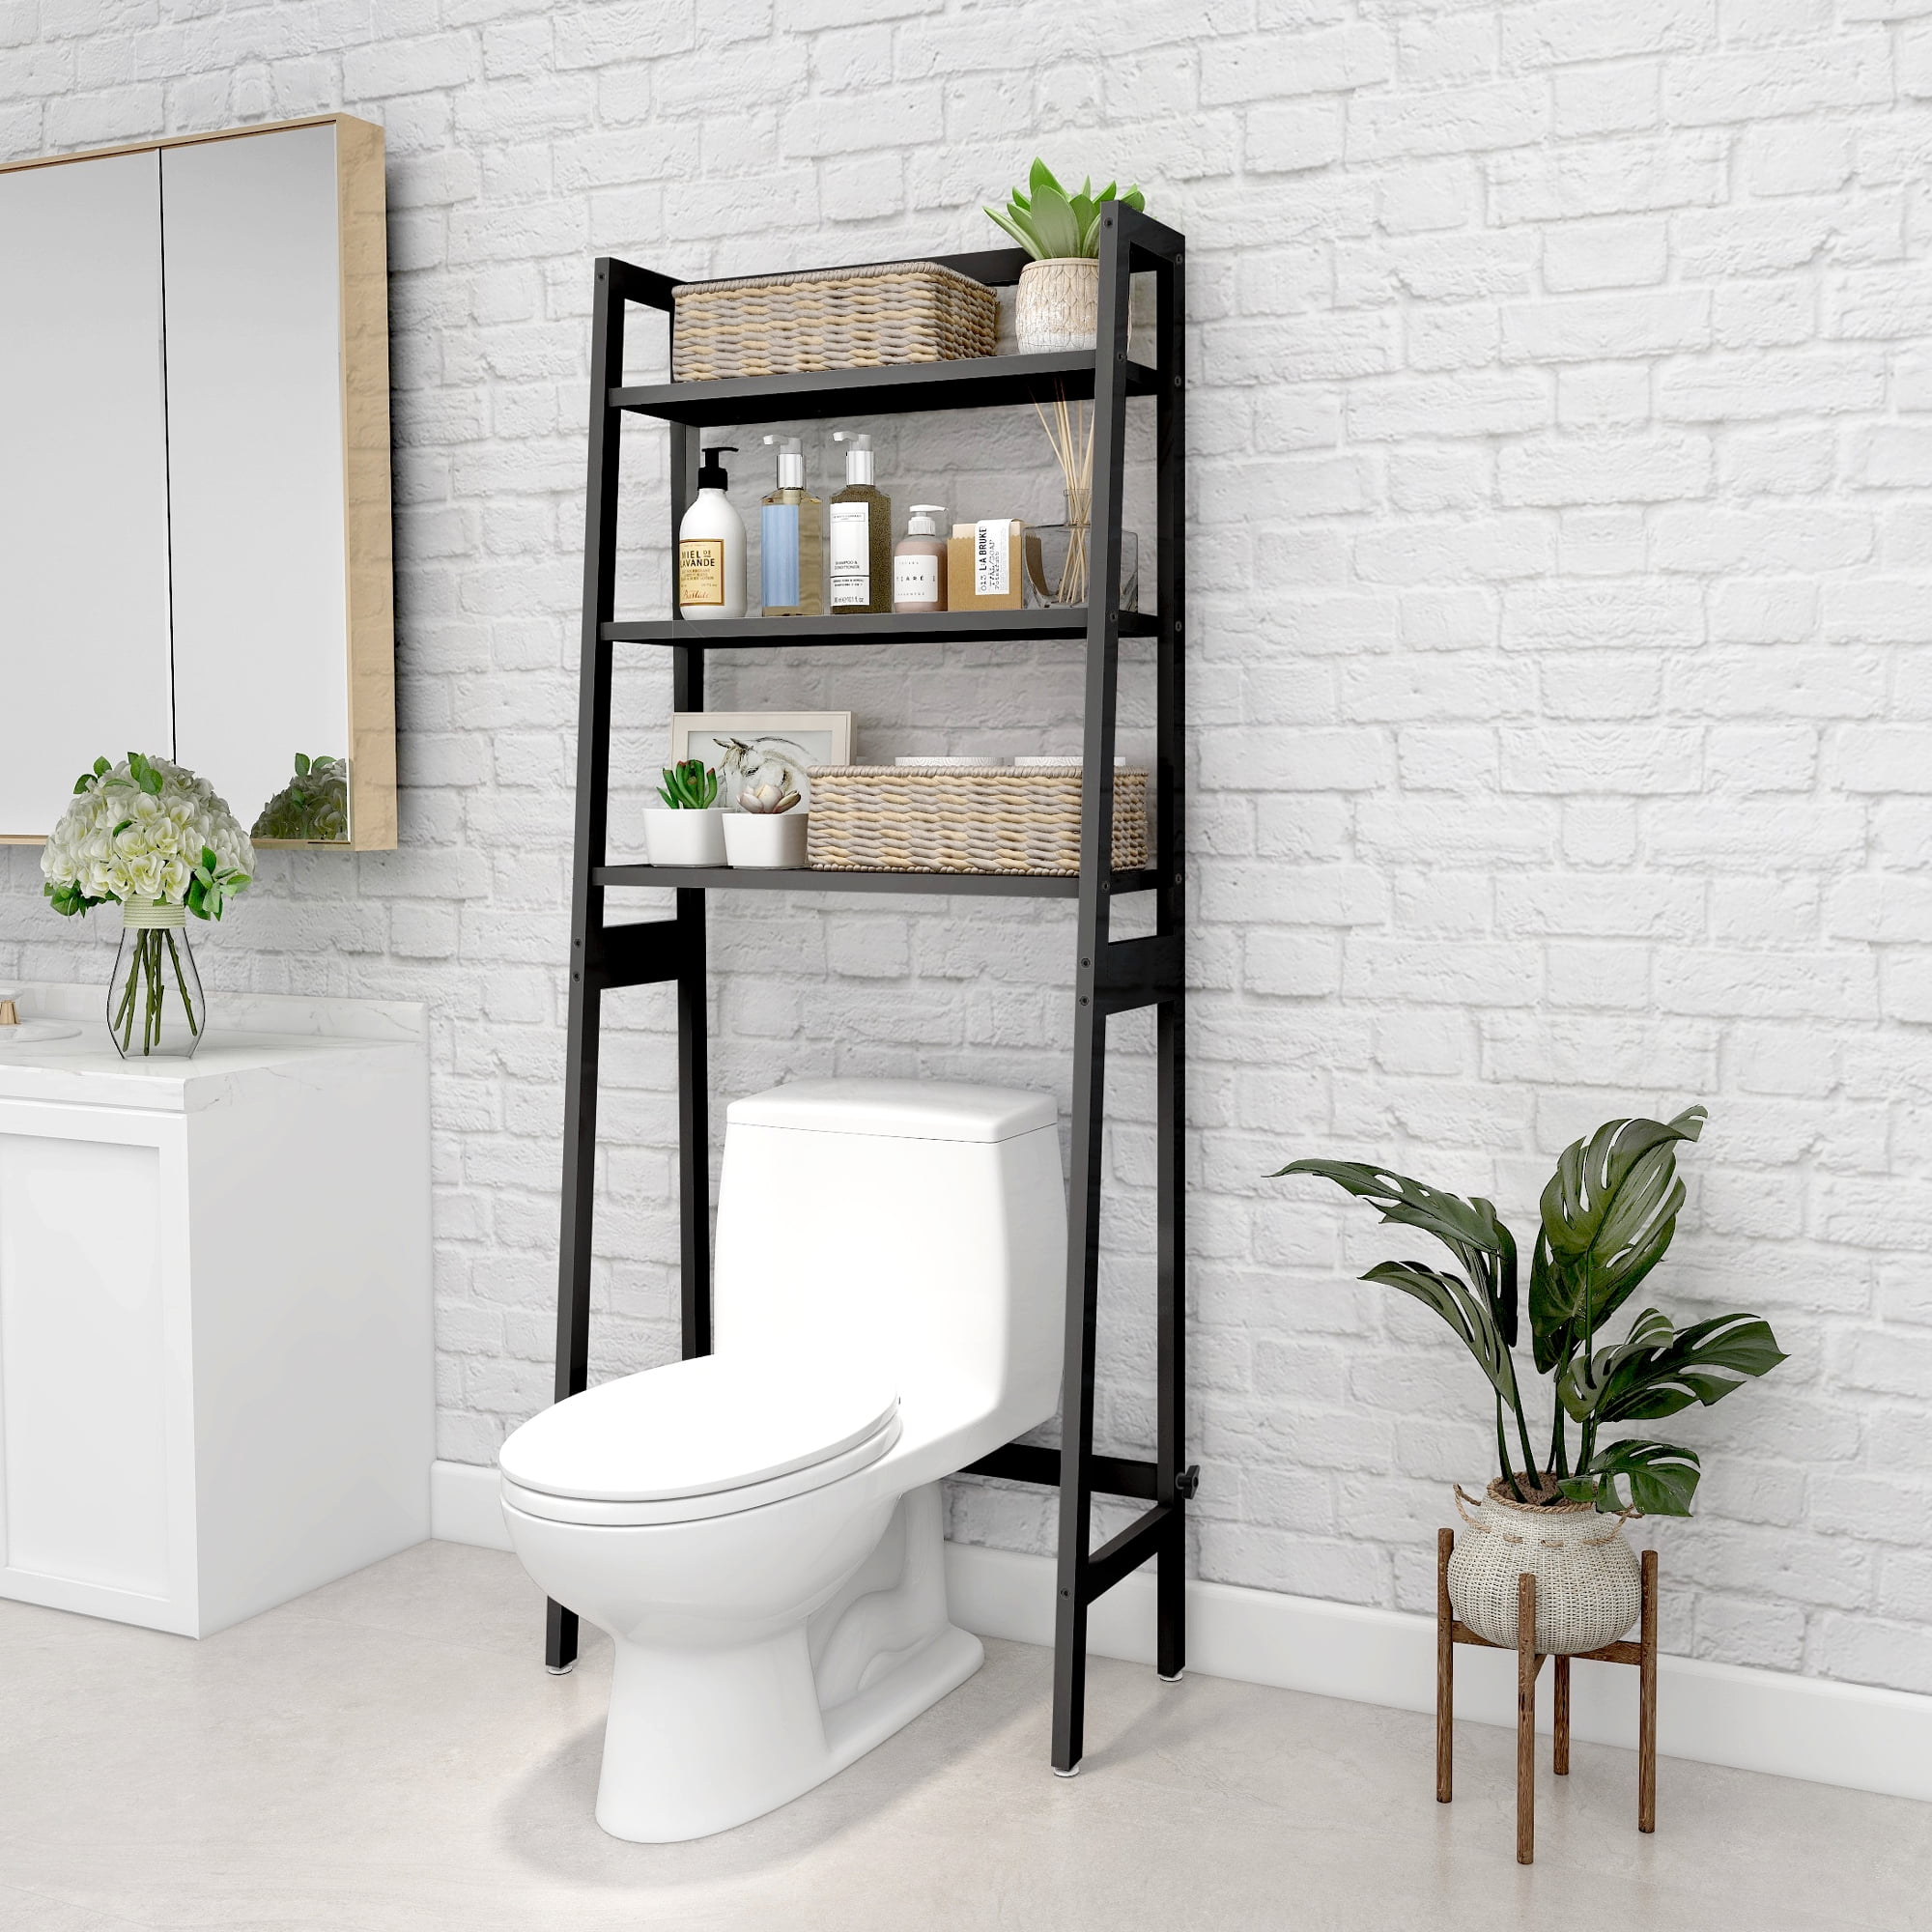 ZZQXTC Over The Toilet Storage, Bathroom Organizer Above Toilet, Wood Metal  Bathroom Space Saver Stand Behind Toilet, Storage Cabinet with Doors and